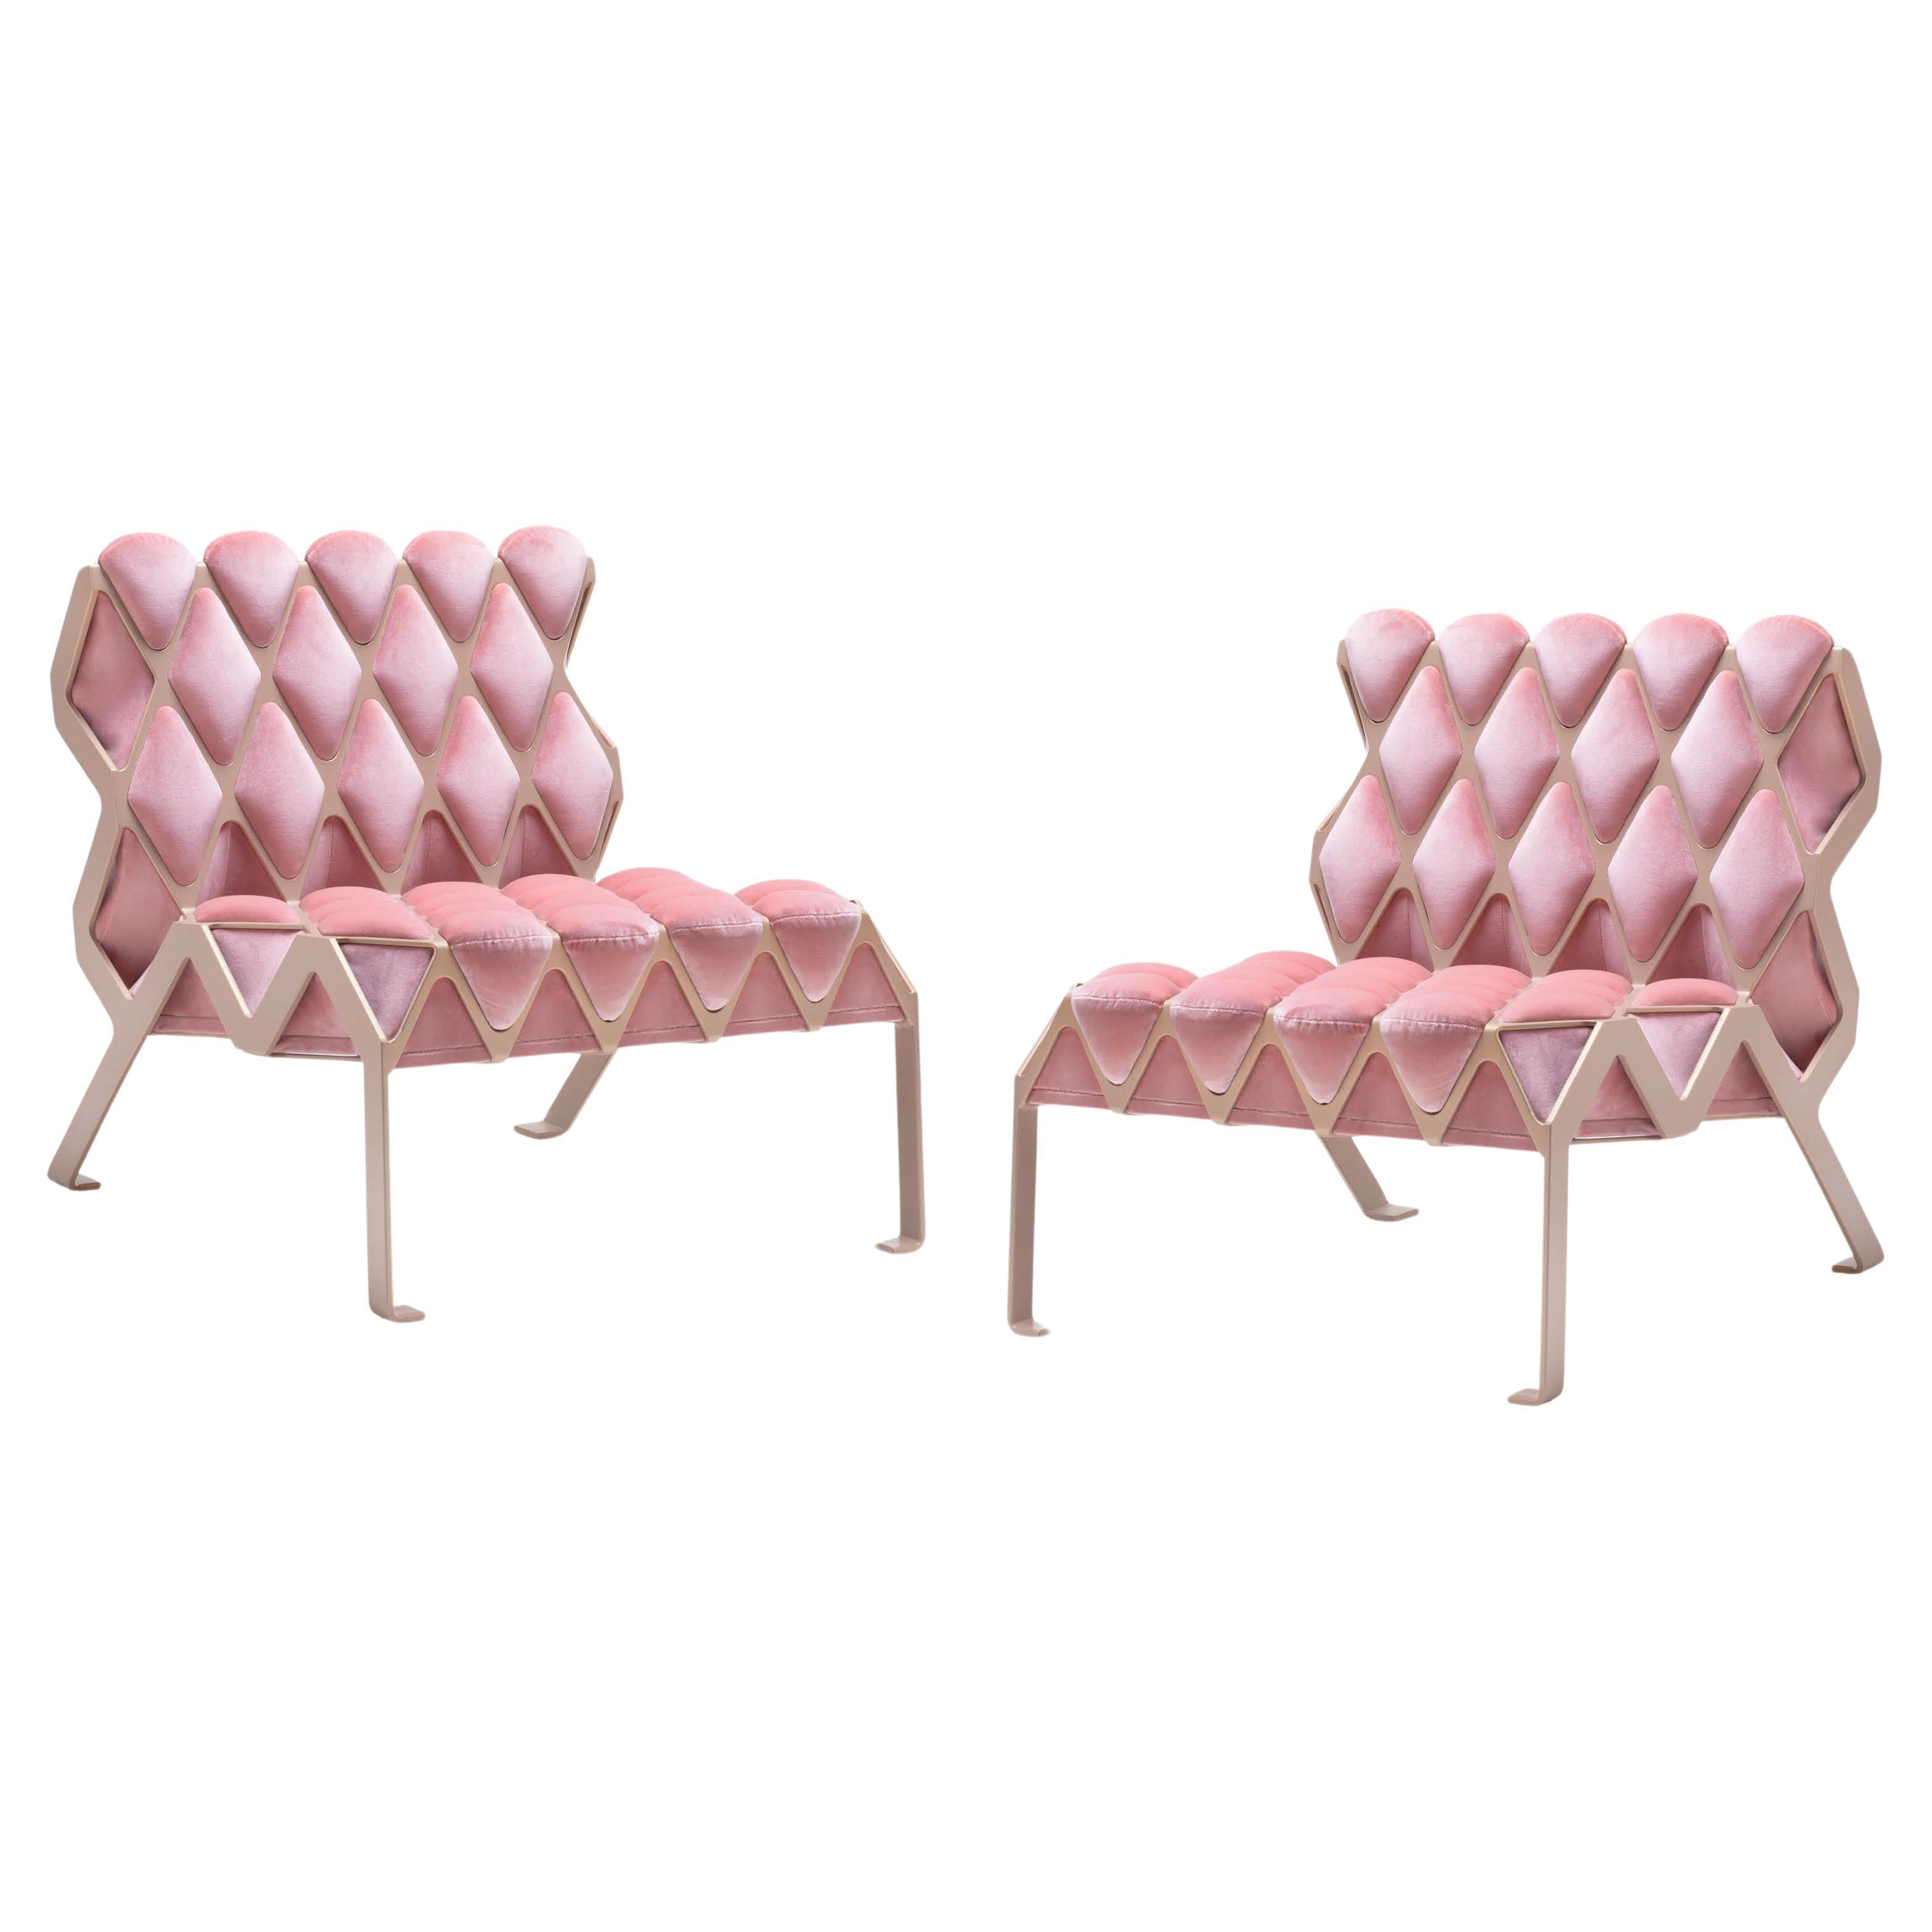 DUO Handcrafted Matrice Chair in Steel and Parma Velvet by Tawla For Sale